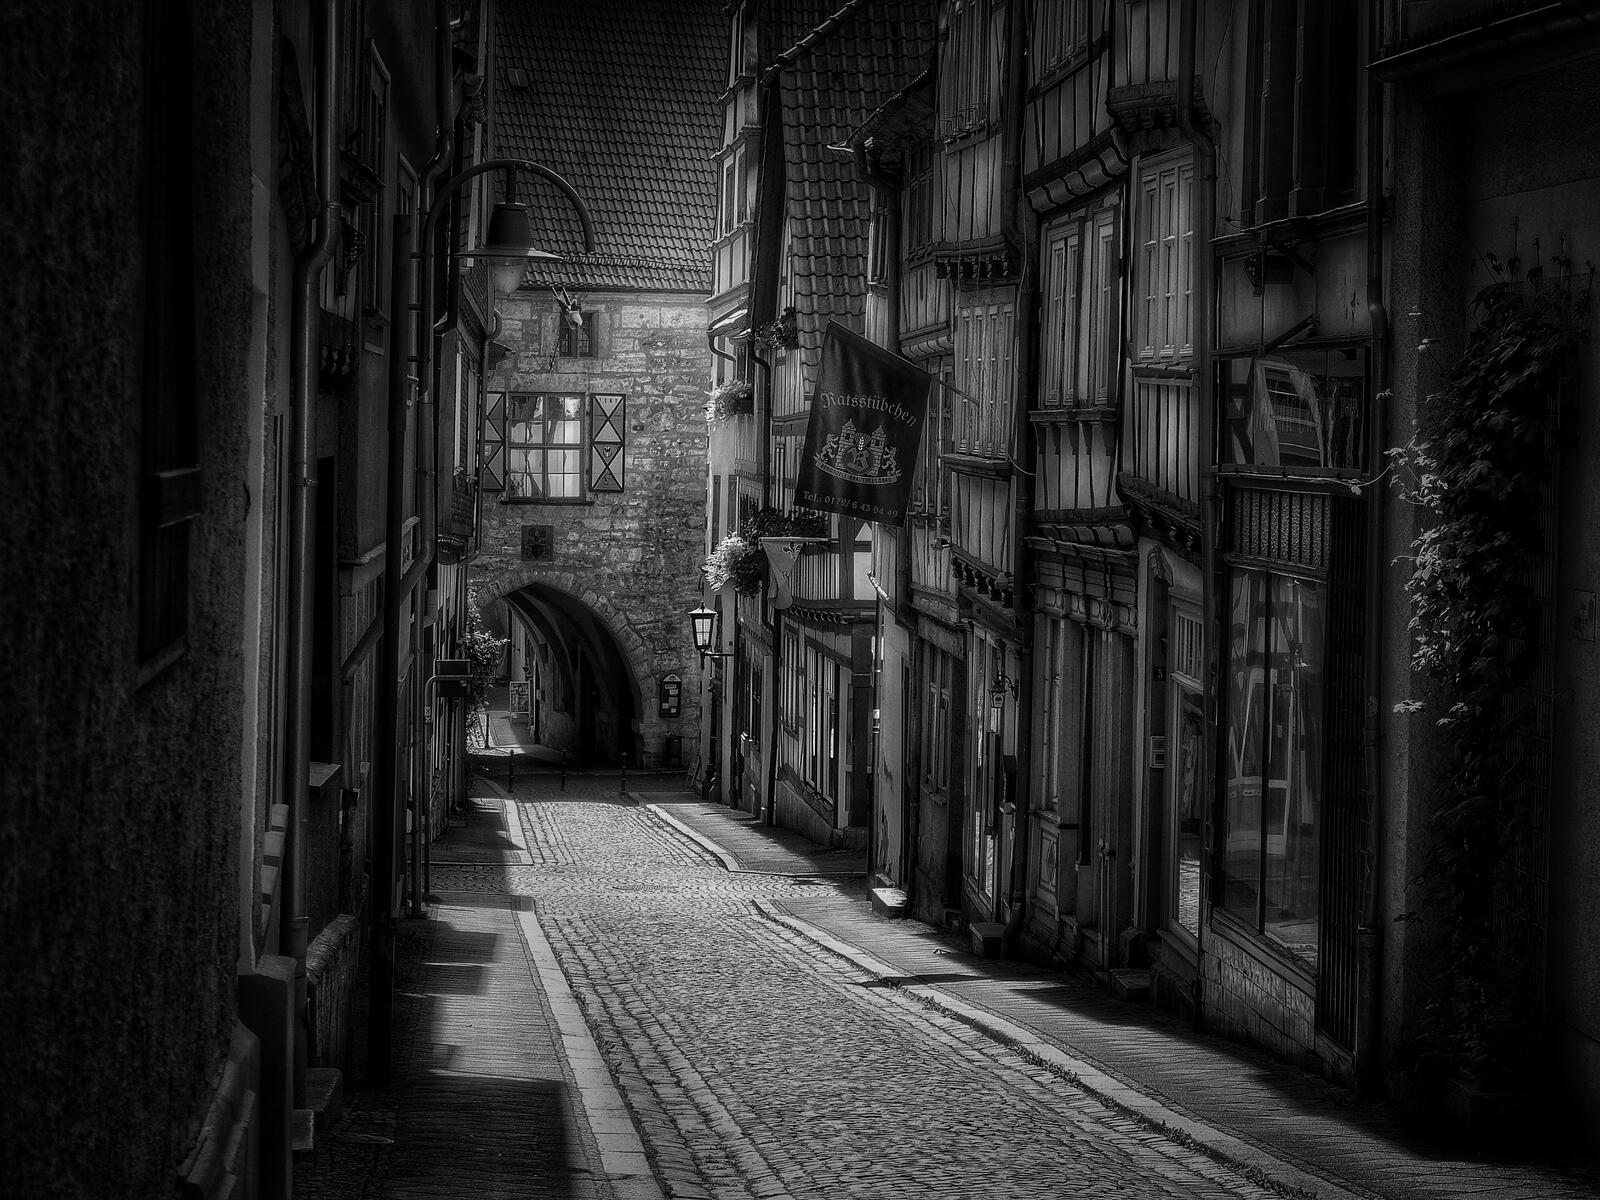 Free photo A city street in an old town in a monochrome photo